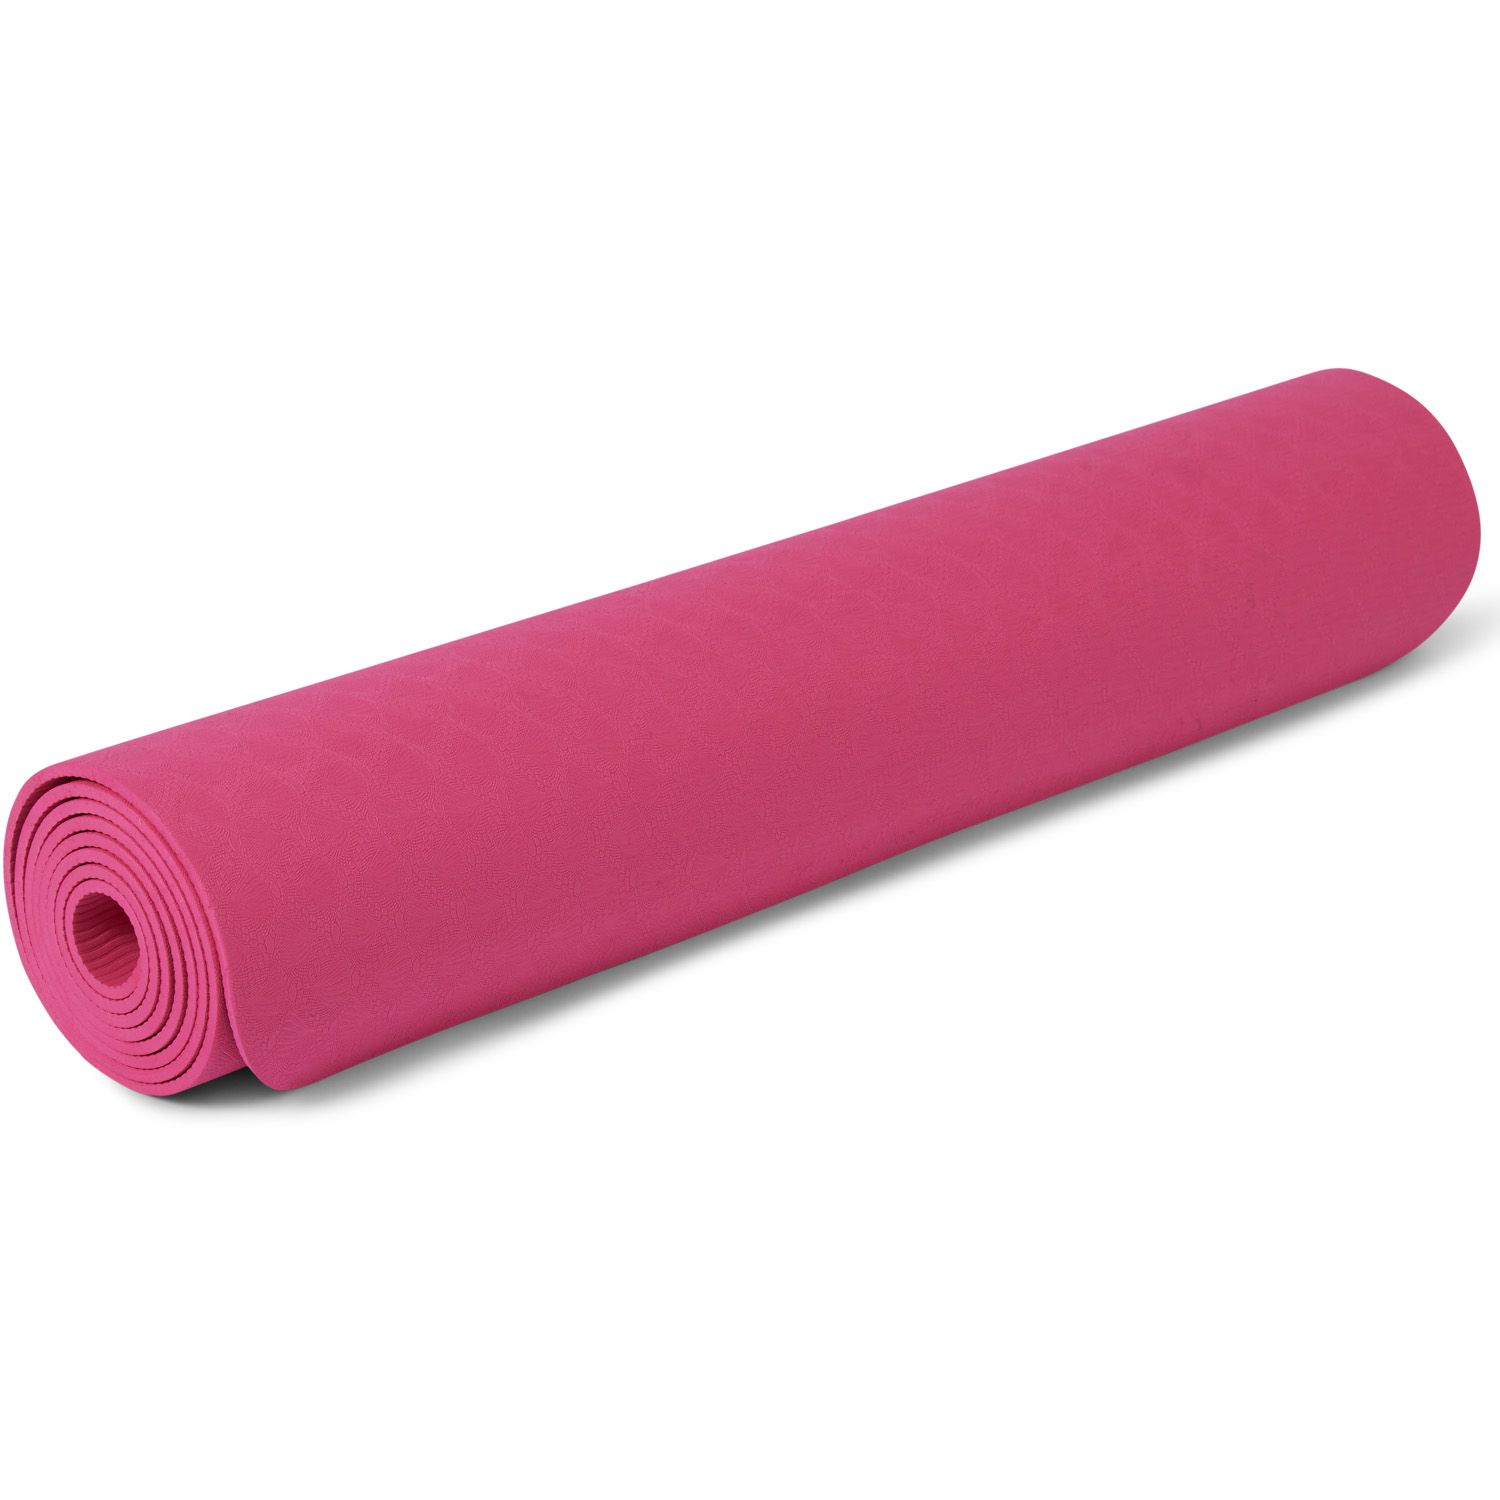 home gym equipment pink yoga mat rolled up